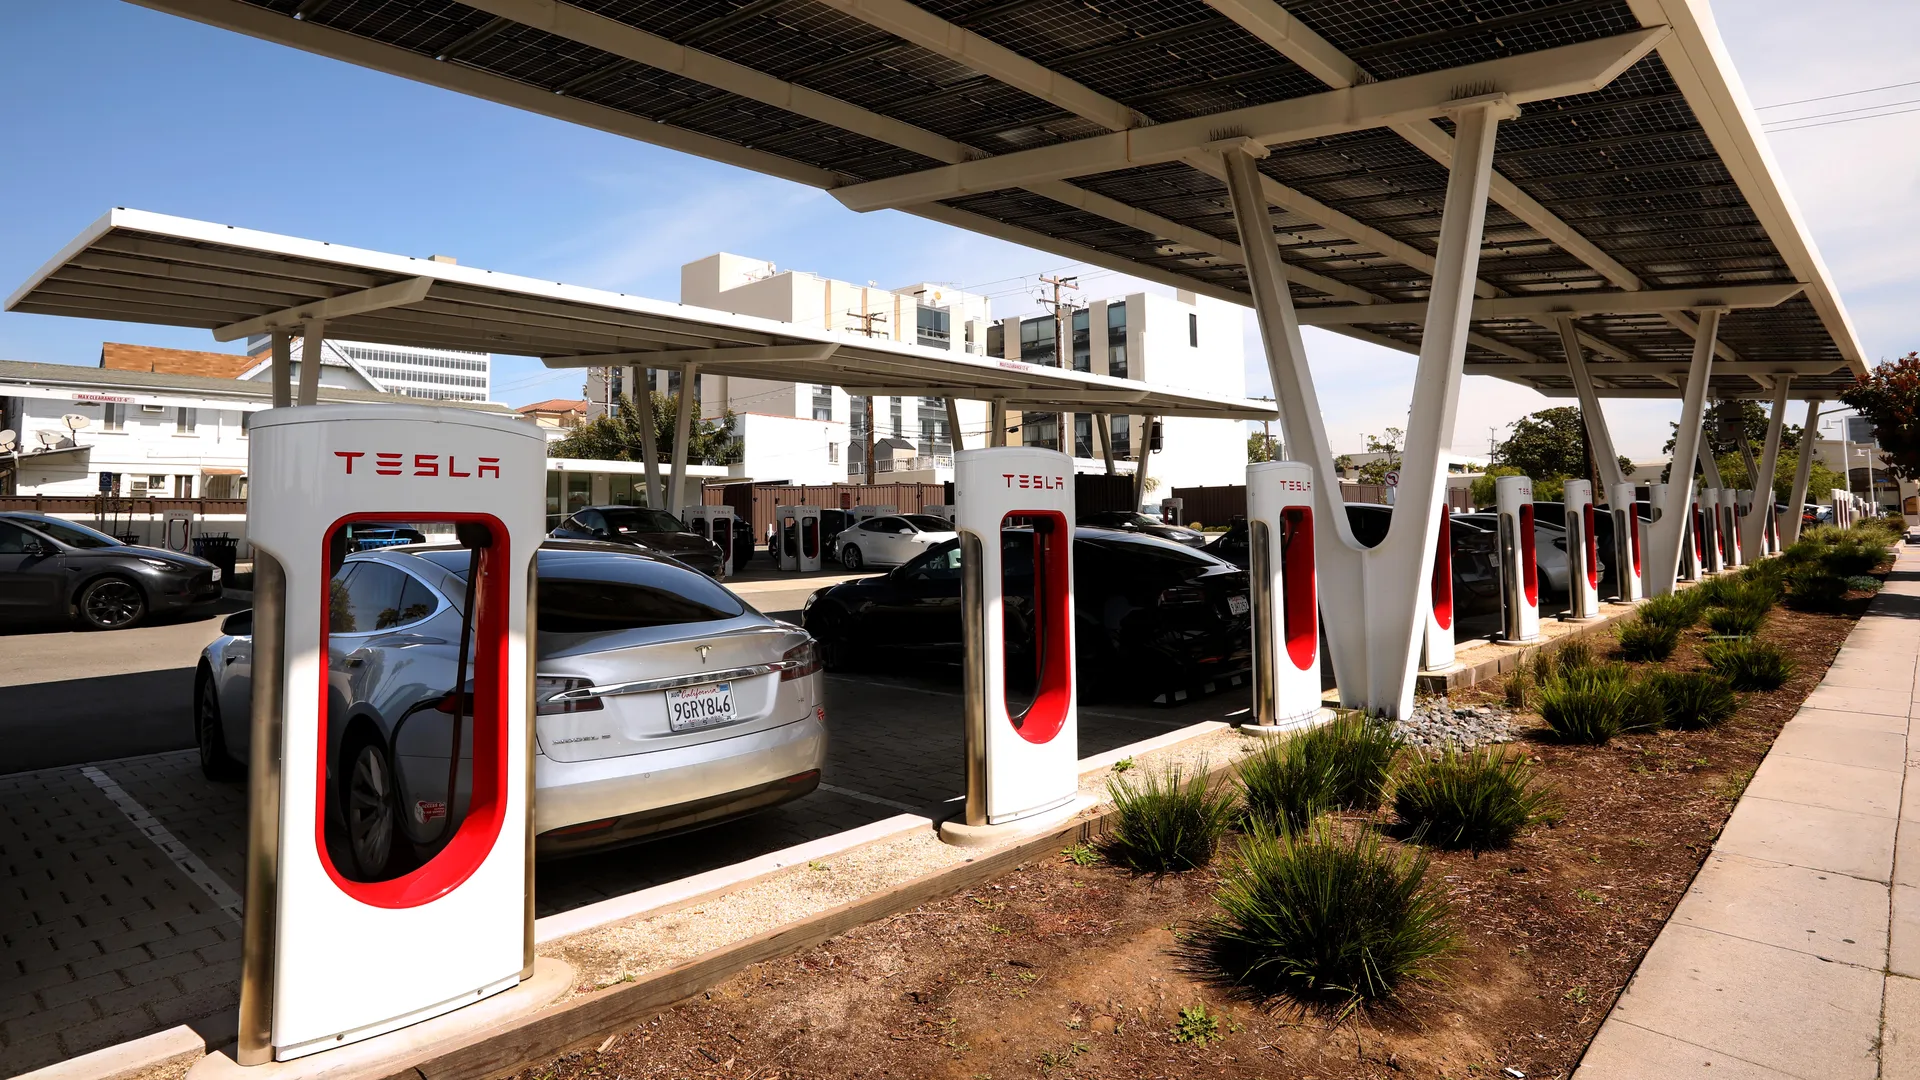 Tesla's Surprising Strategy Shift: The Supercharger Slowdown